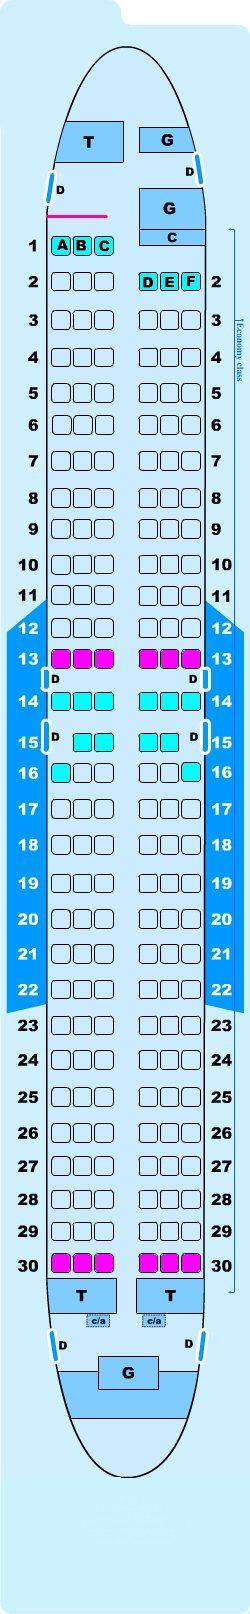 boeing 737 800 seating map – boeing 737 800 seat map american airlines ...